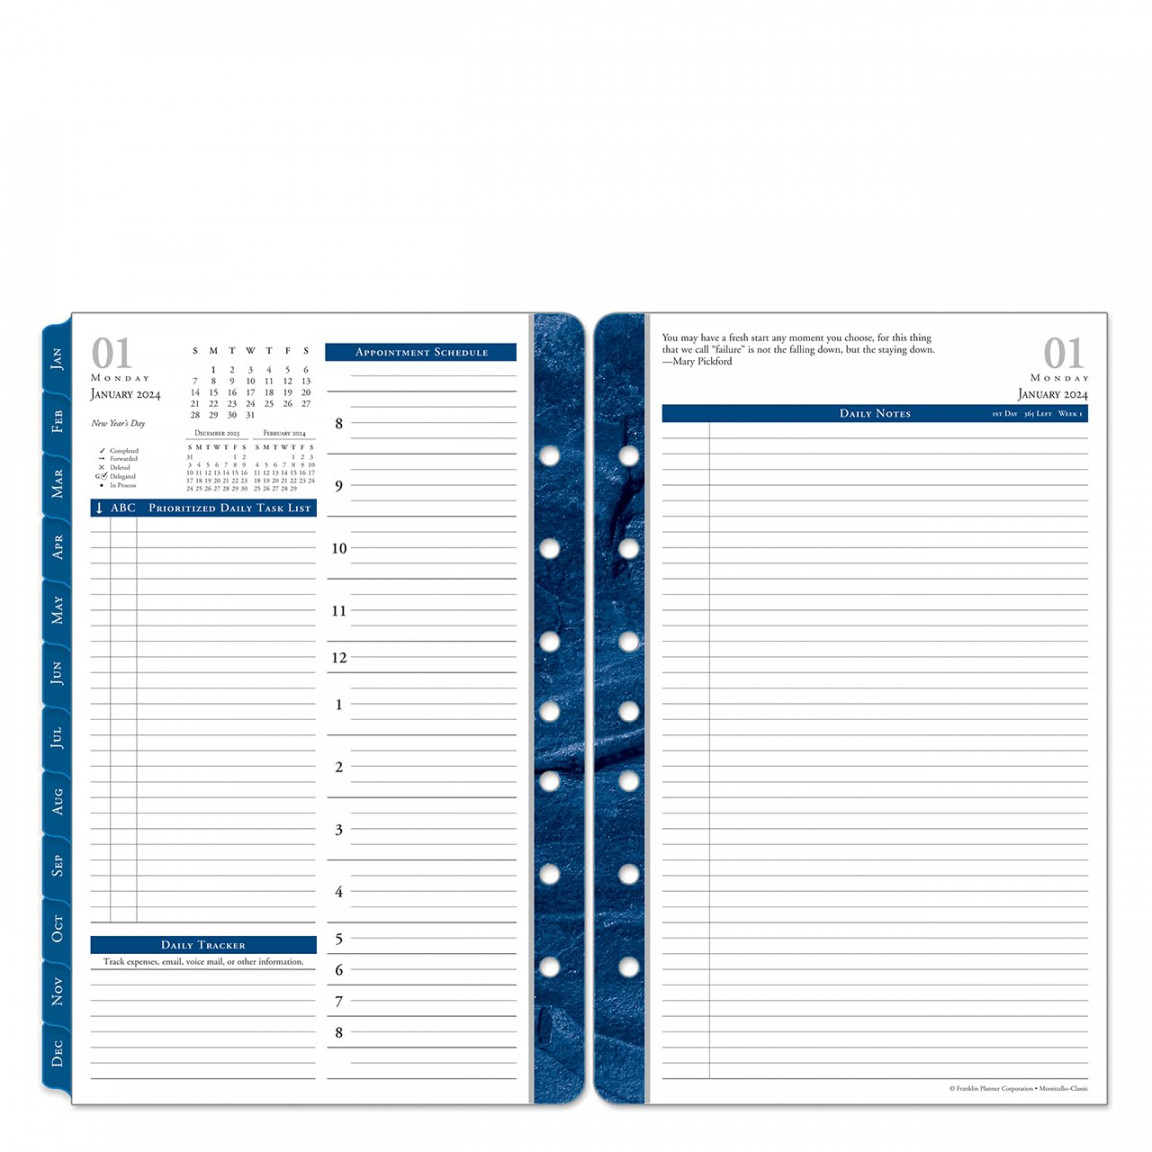 FranklinCovey - Monticello Two Page Per Day Ring-Bound Planner (Classic,  Jan  - Dec )